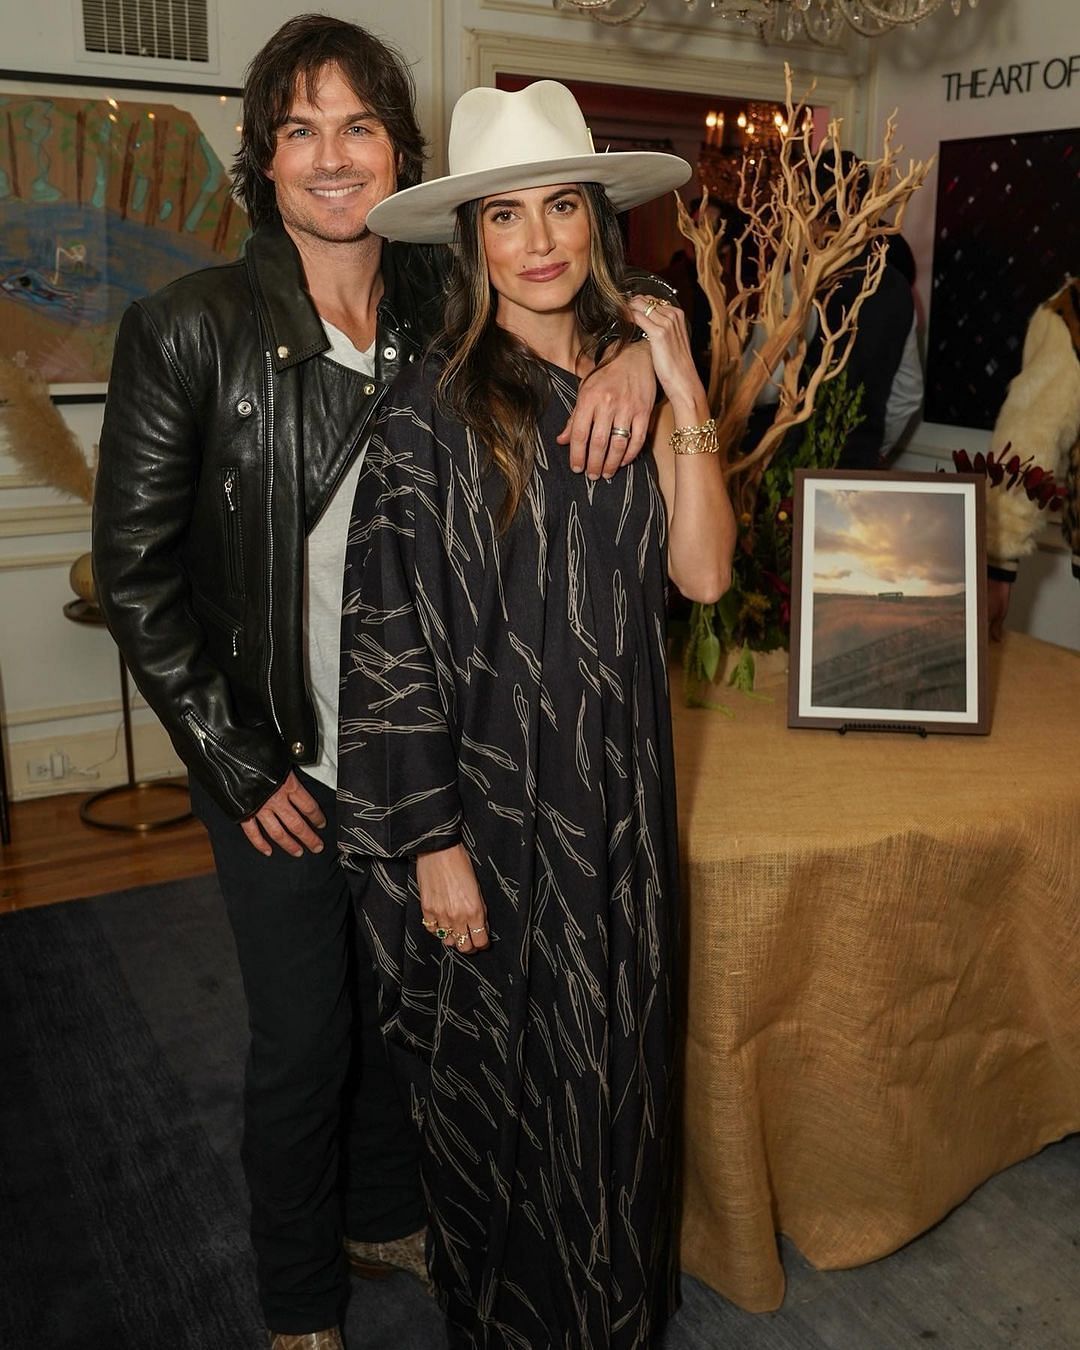 When did Nikki Reed and Ian Somerhalder meet each other?